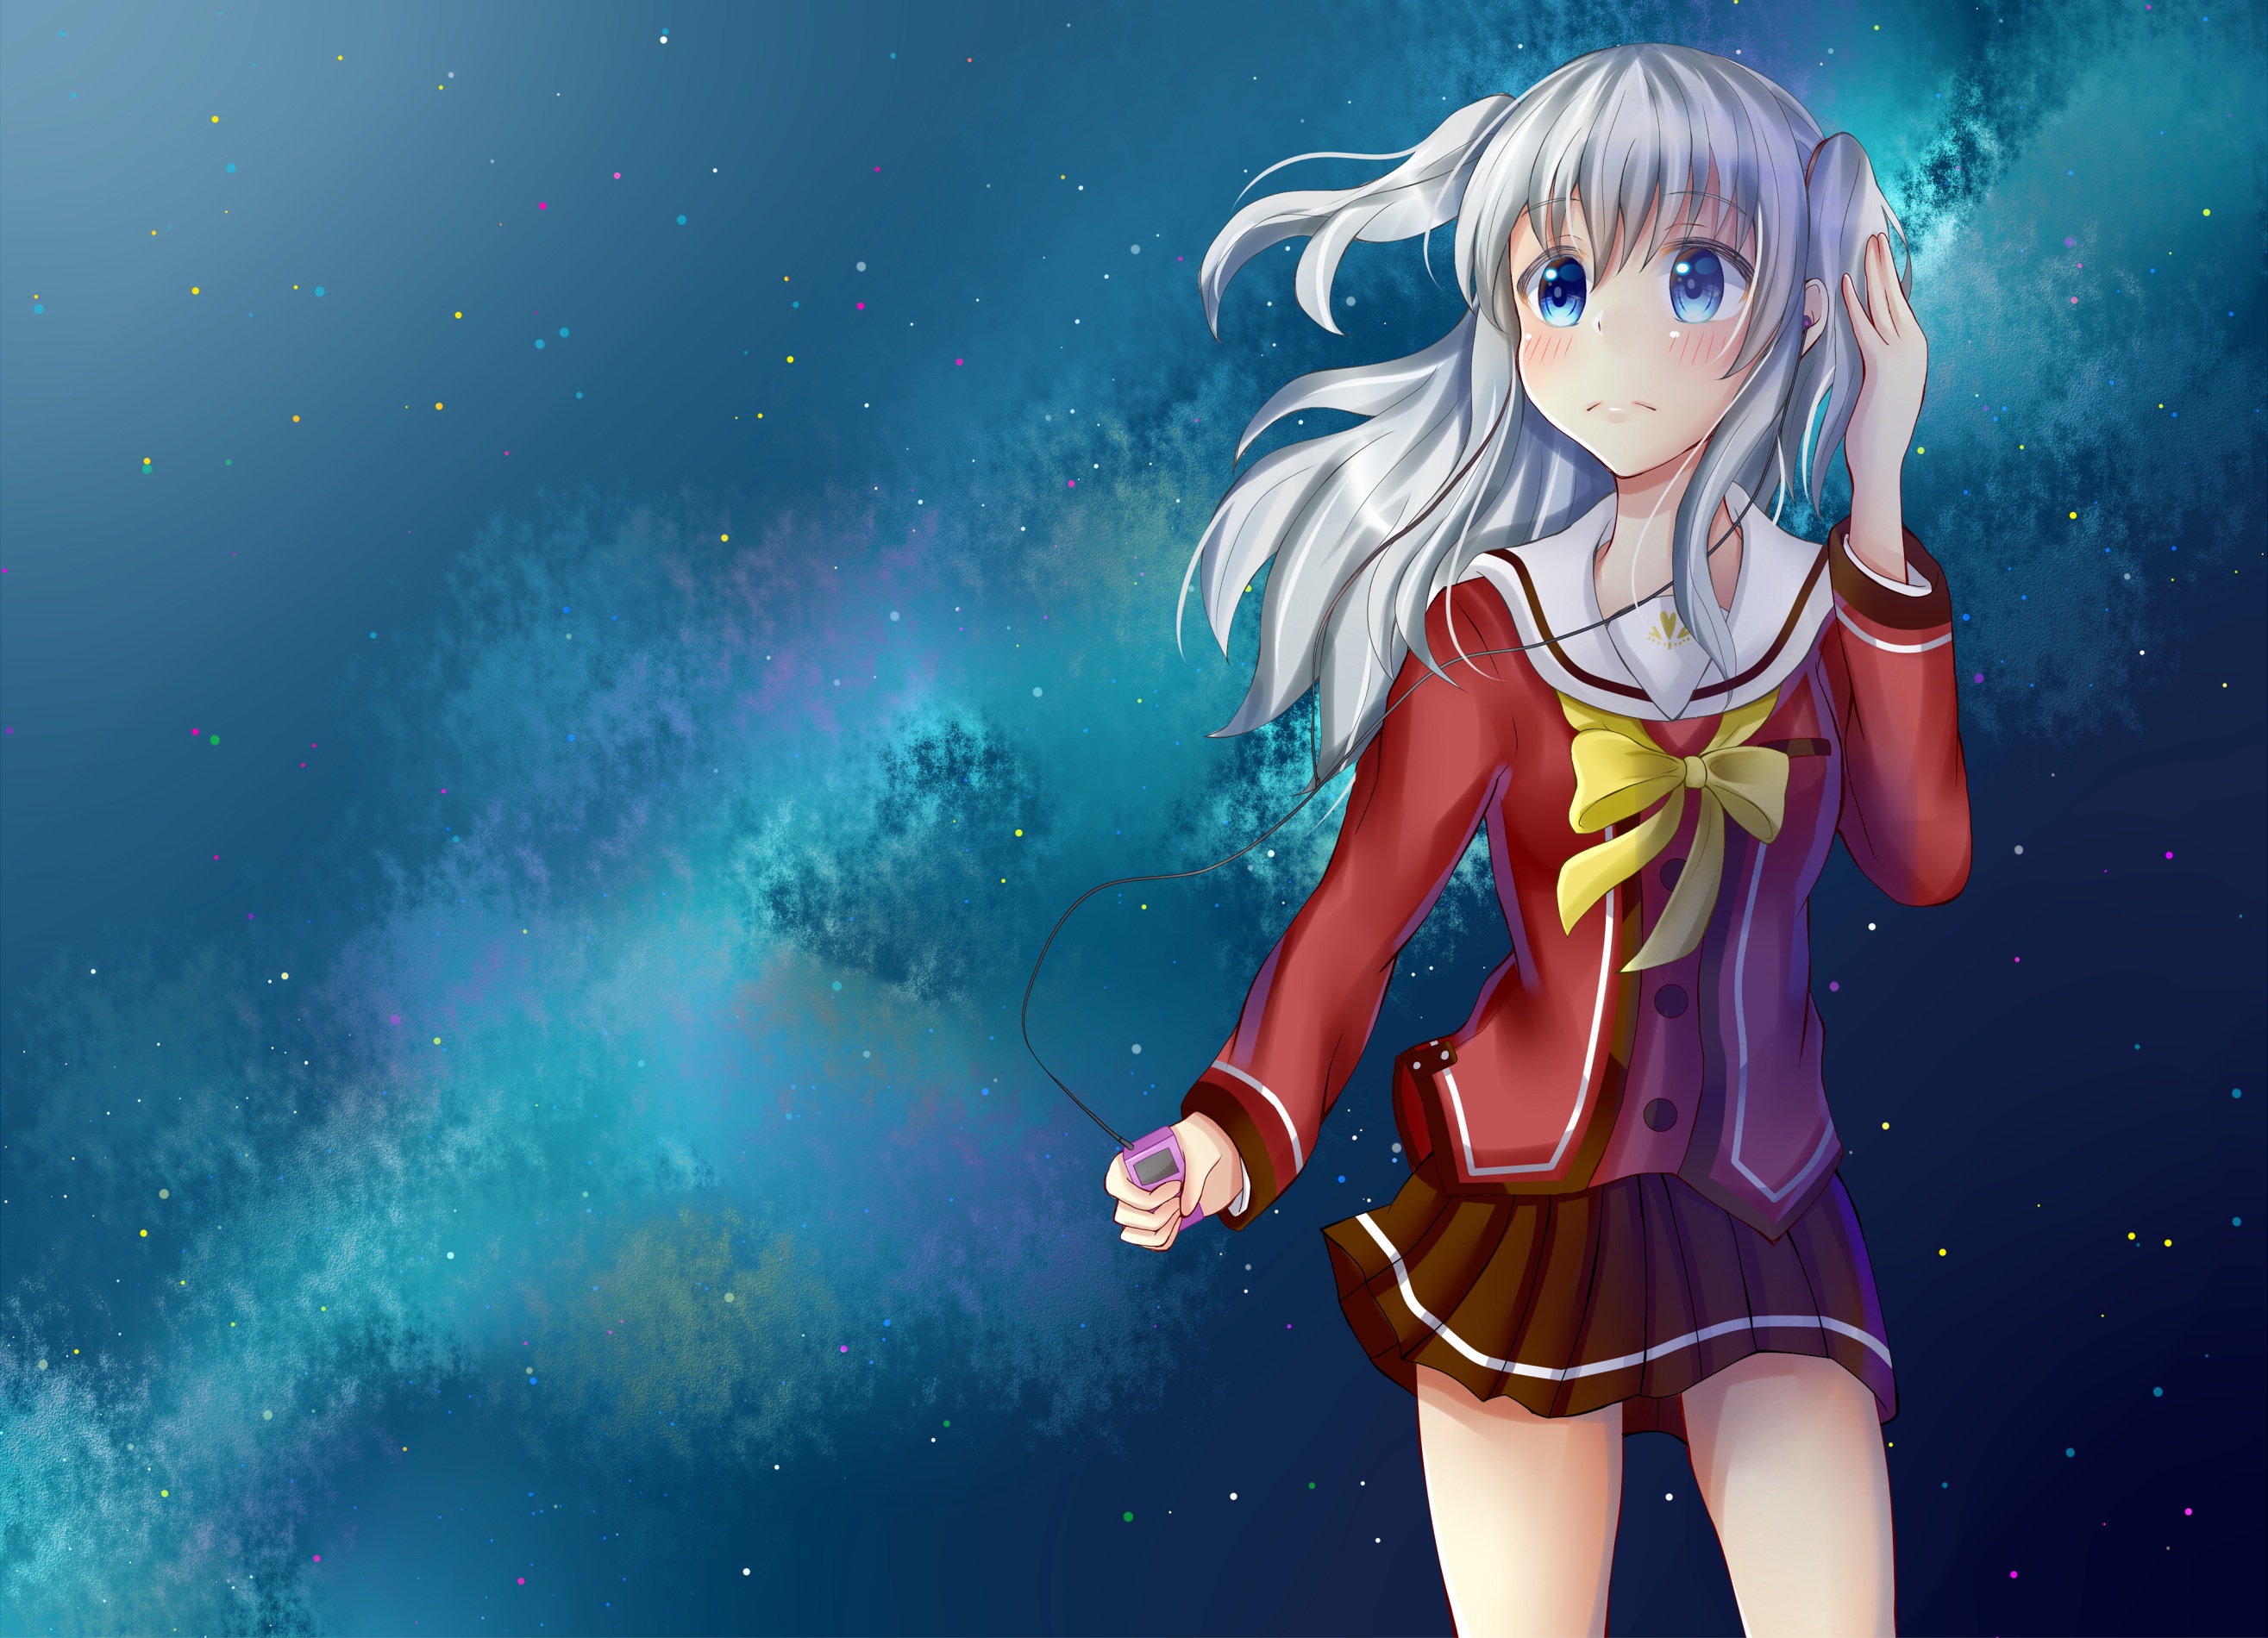 22 Charlotte Anime Wallpapers for iPhone and Android by Angela Murphy